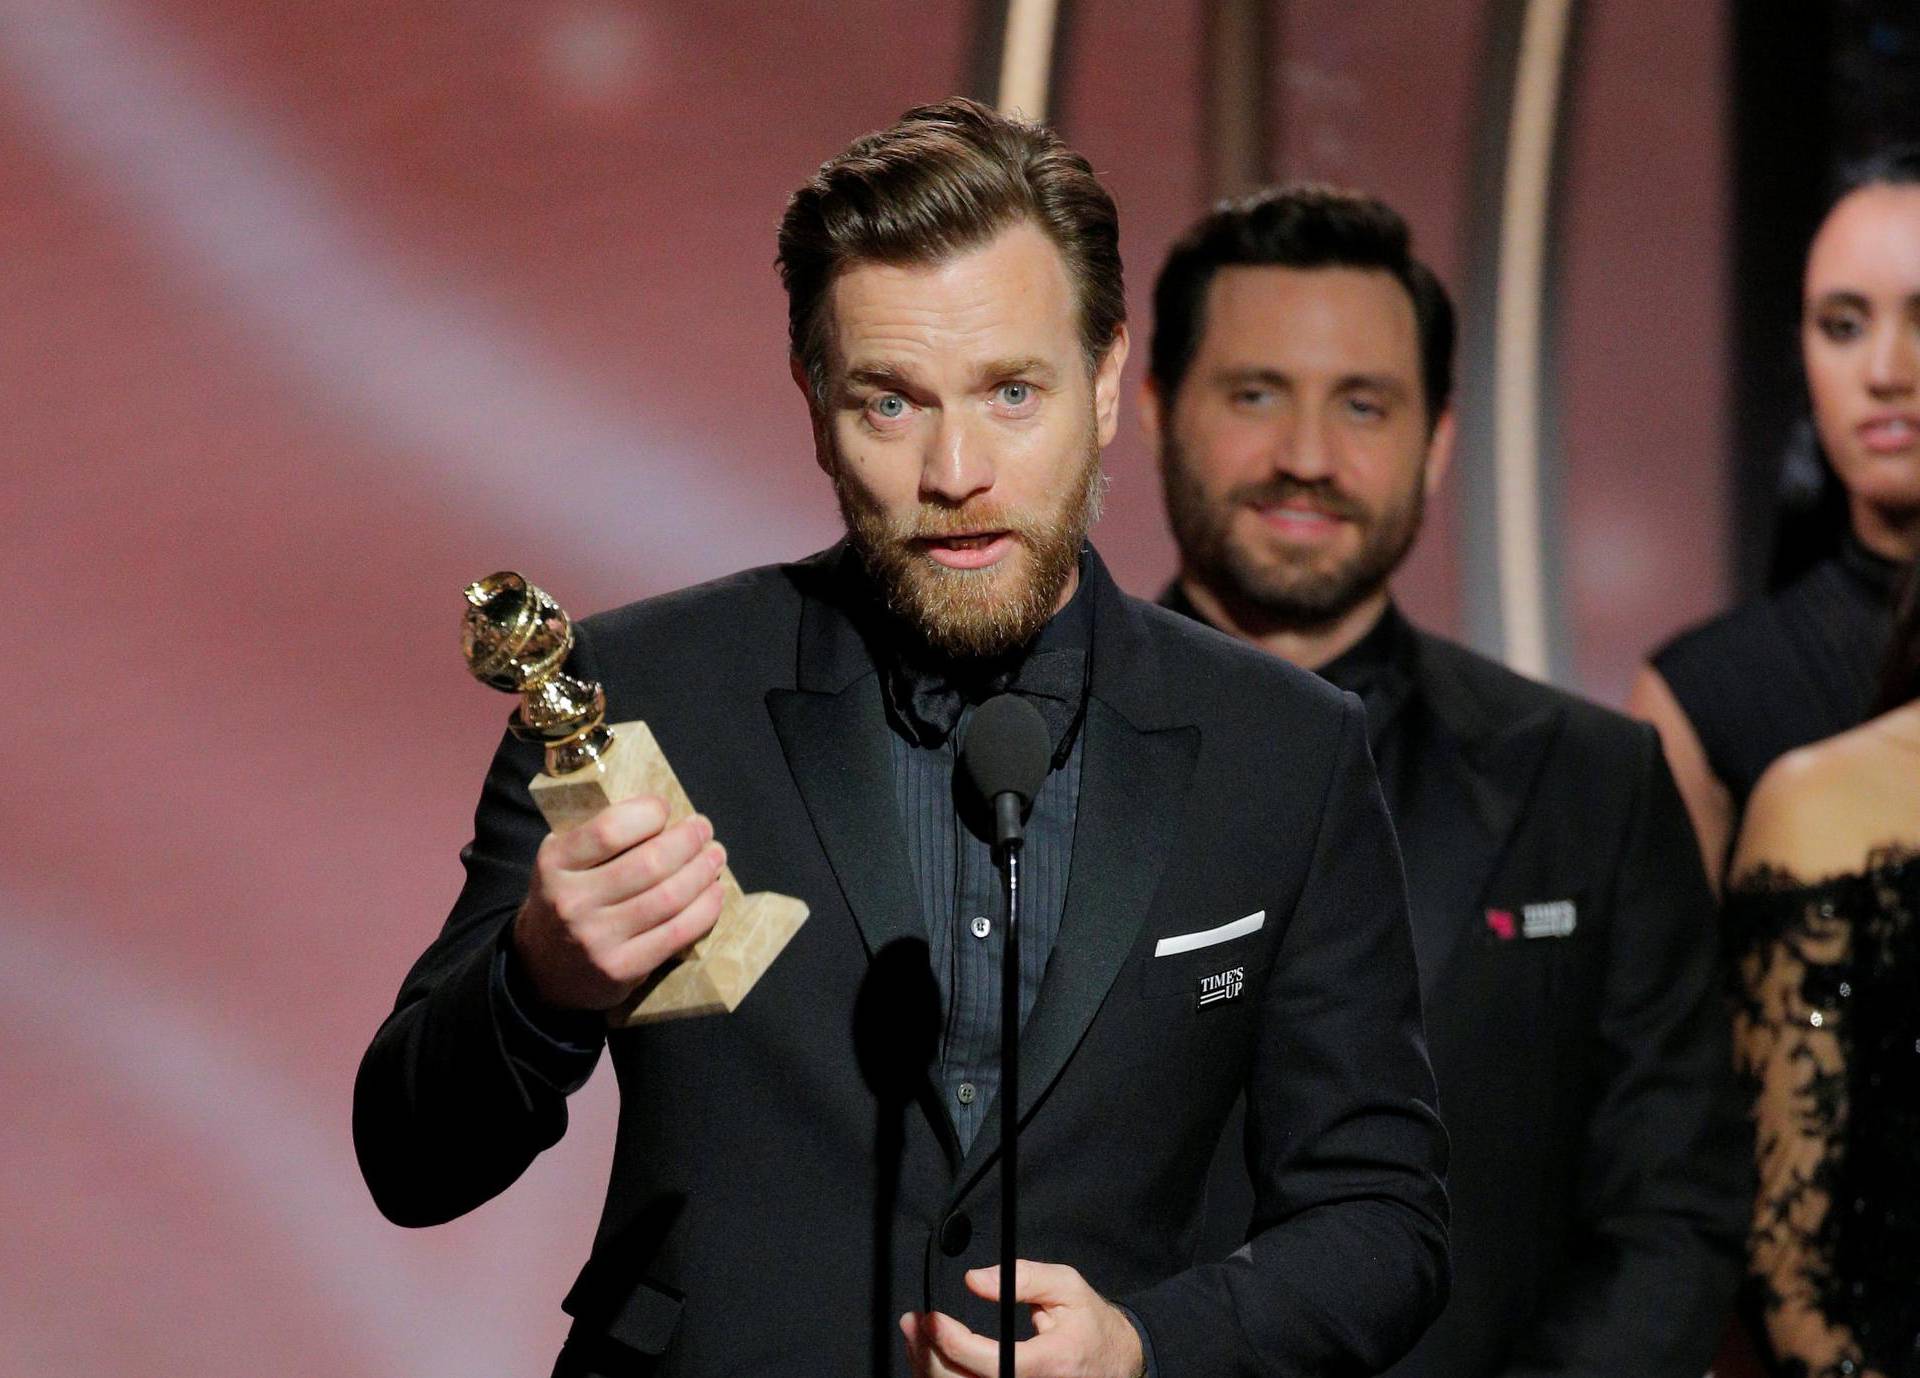 Ewan McGregor winner Best Performance by an Actor in a Television Limited Series or Motion Picture Made for Television "Fargo" at the 75th Golden Globe Awards in Beverly Hills